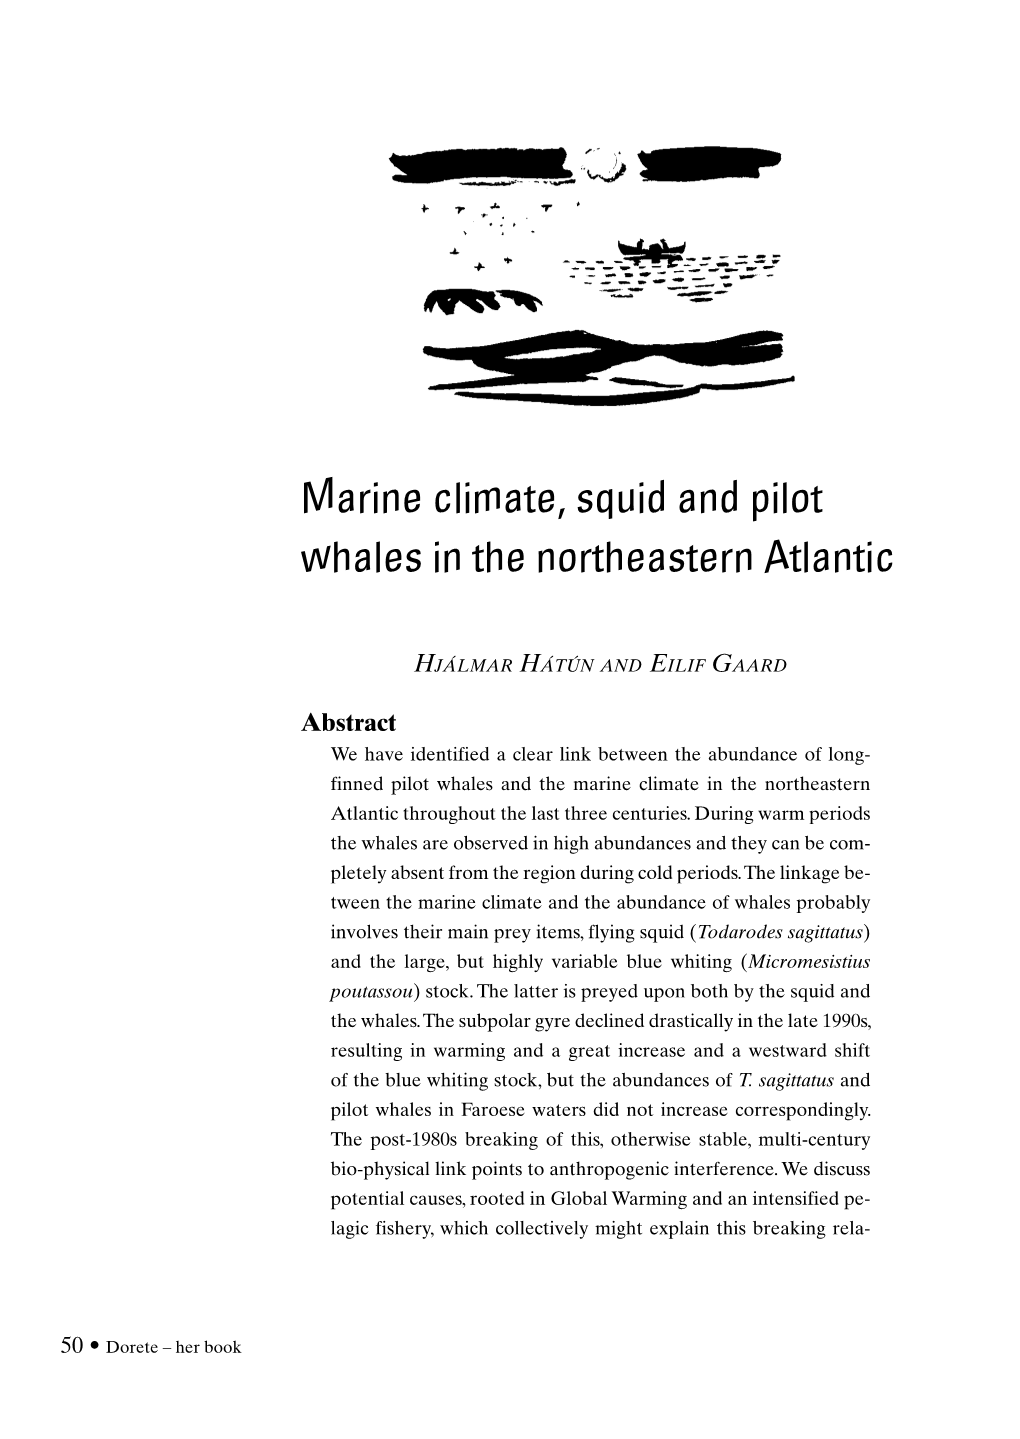 Marine Climate, Squid and Pilot Whales in the Northeastern Atlantic